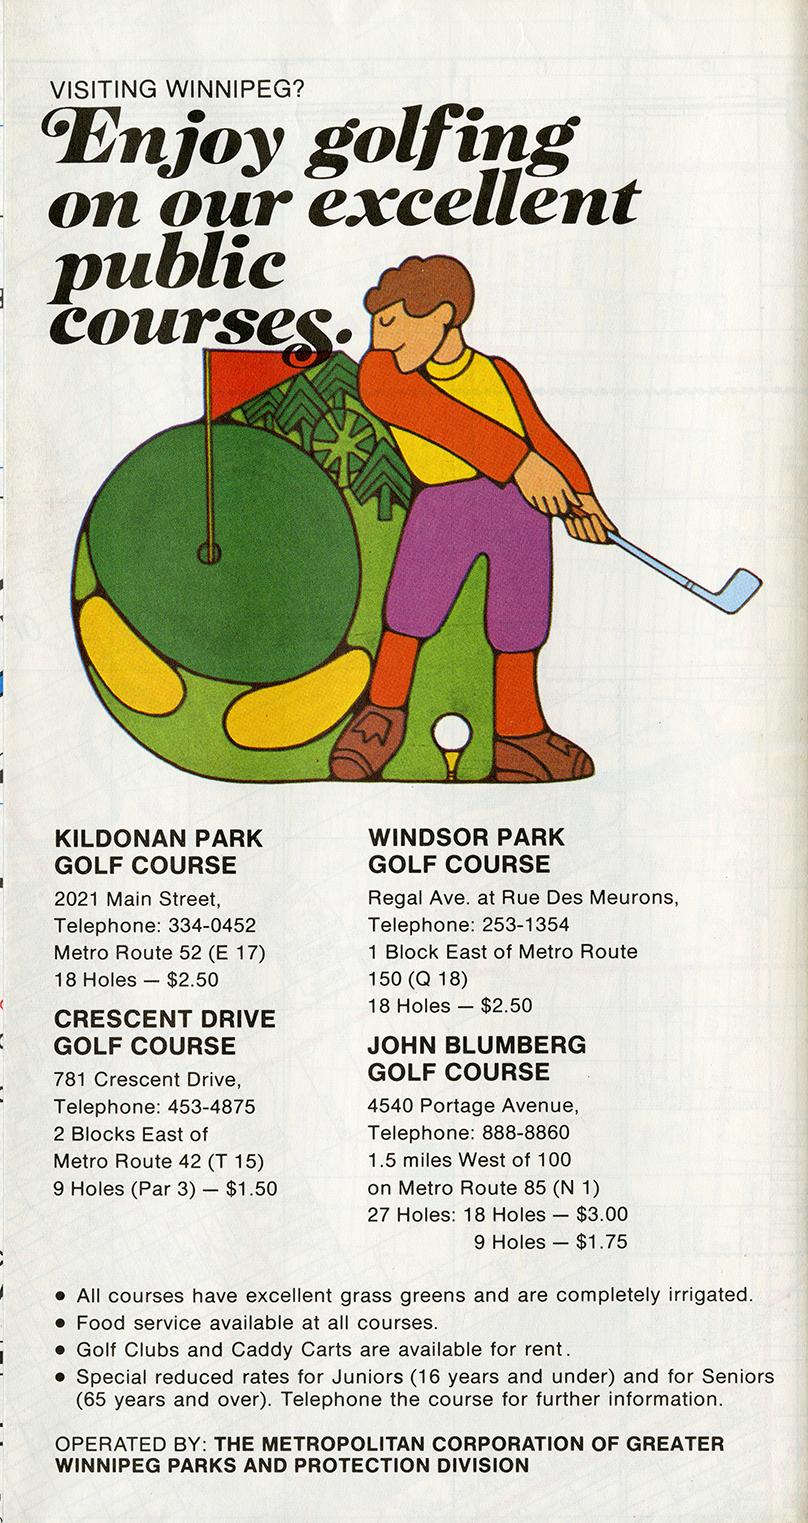 Brochure page advertising municipal golf courses 1966, Metropolitan Corporation of Greater Winnipeg Parks and Protection Division, City of Winnipeg Archives Parks and Recreation Photograph Collection